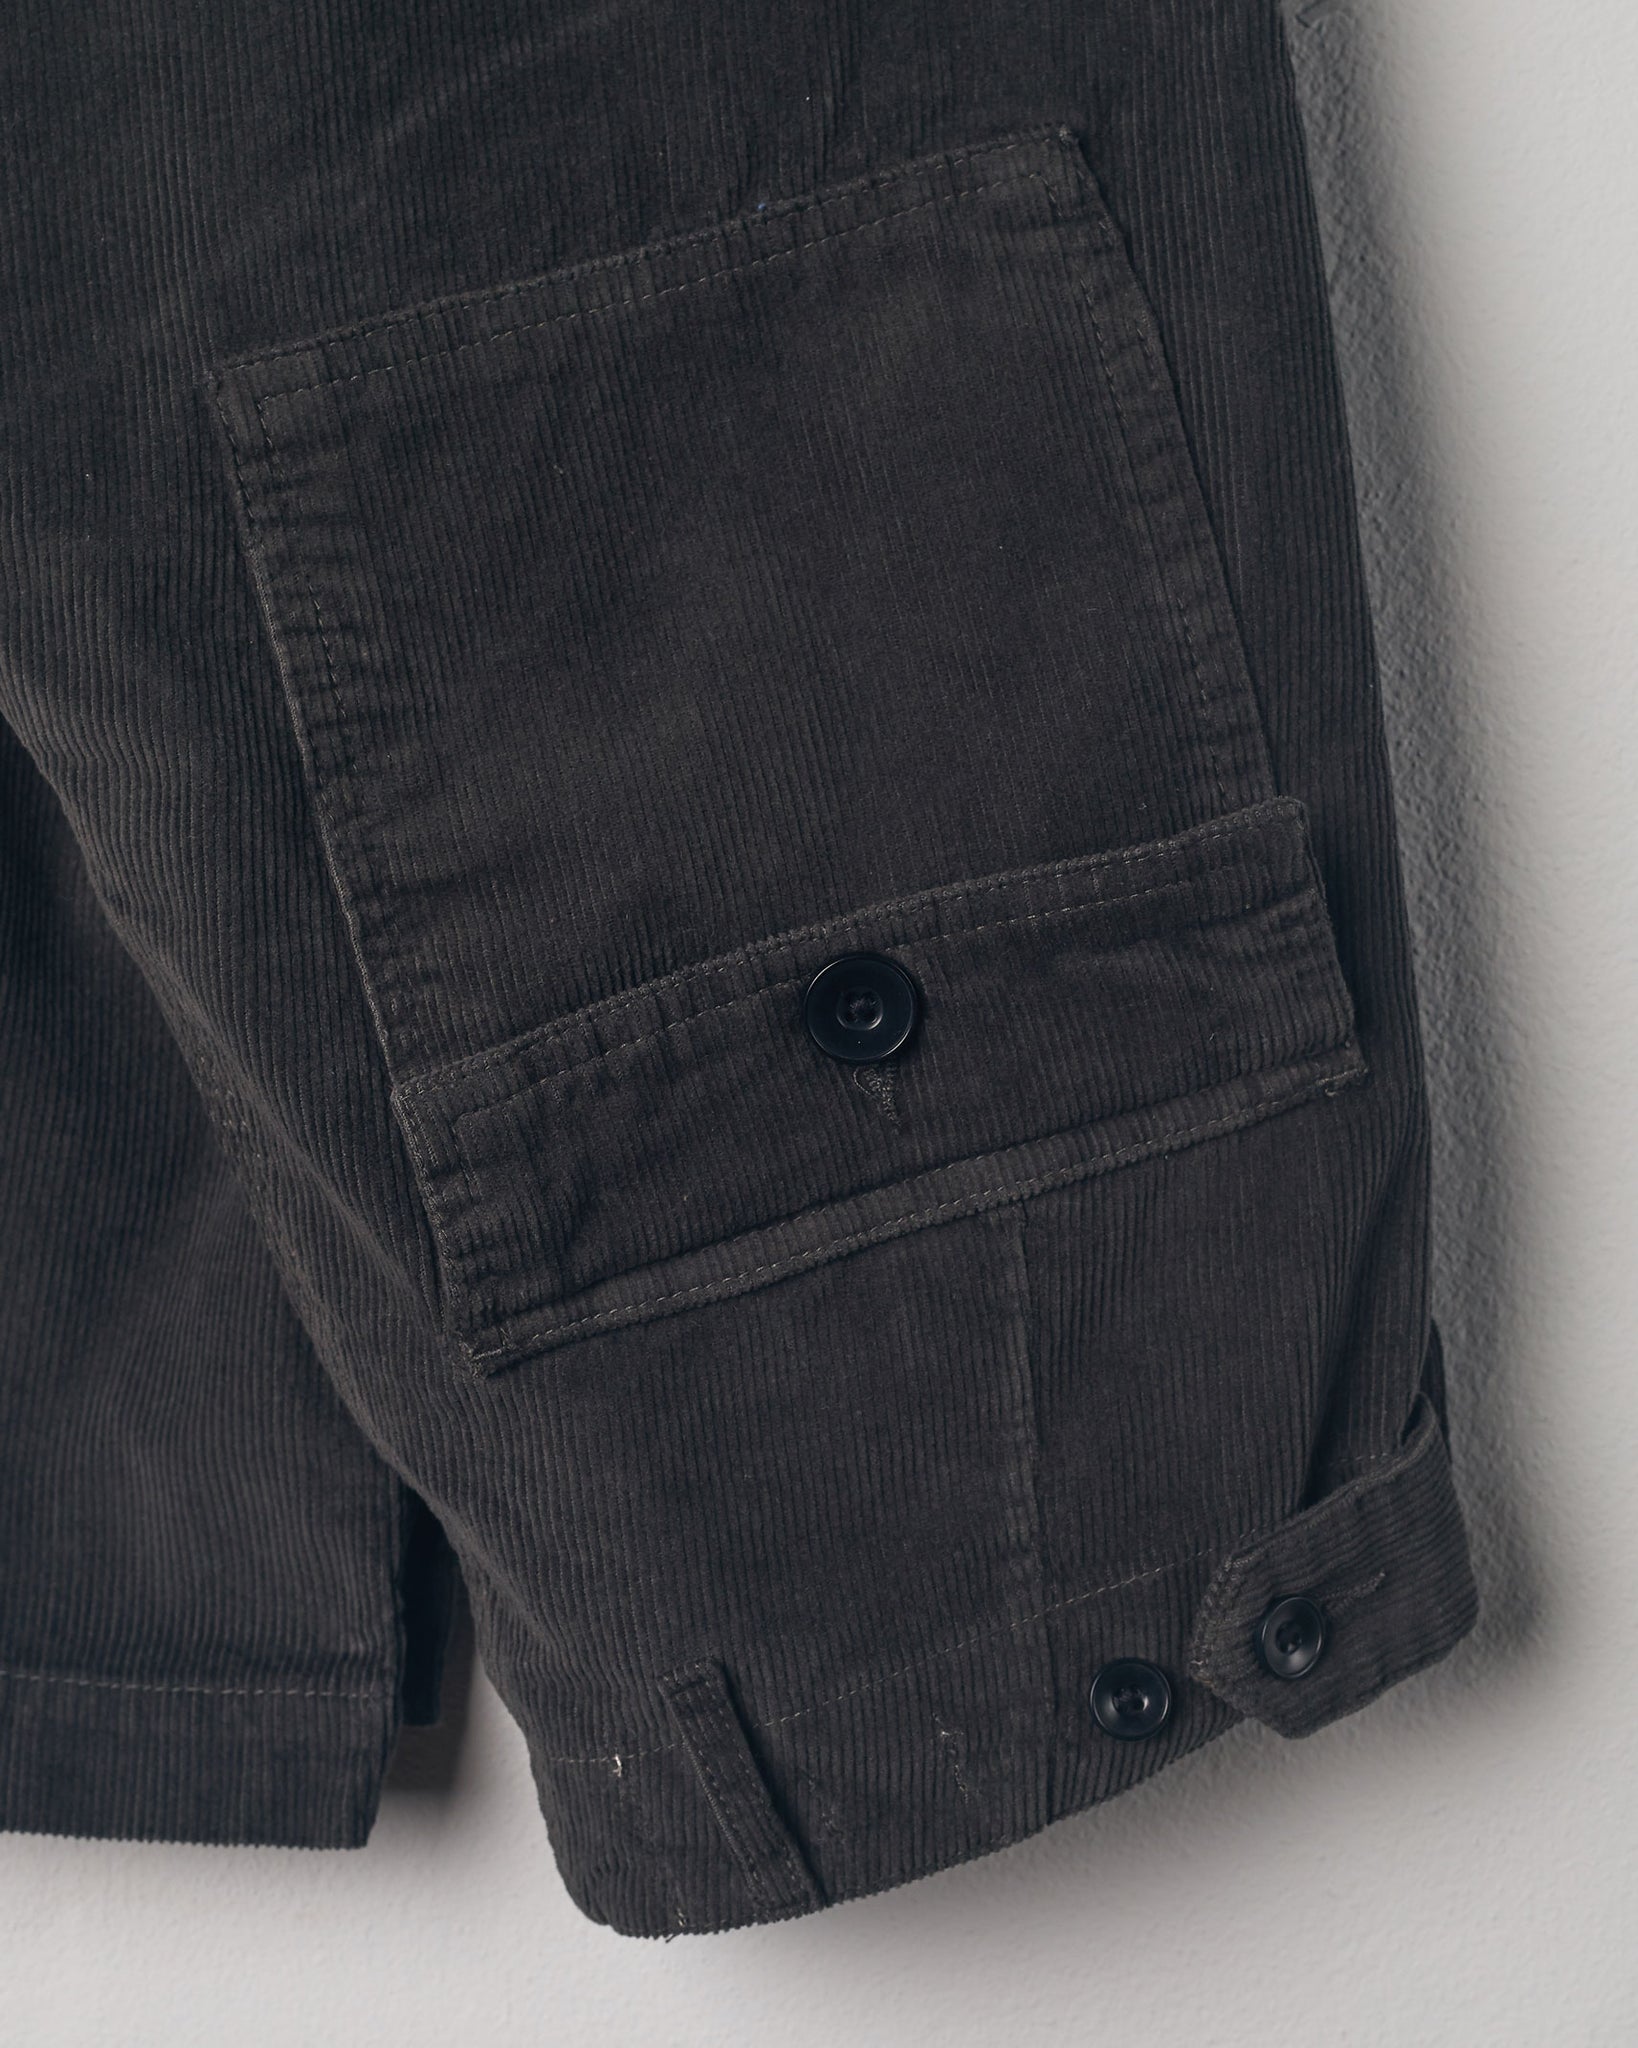 Close-up view of Uskees faded black corduroy work pants with focus on natural corozo buttons, left rear pocket, belt loops, triple stitching and adjustable button waist.